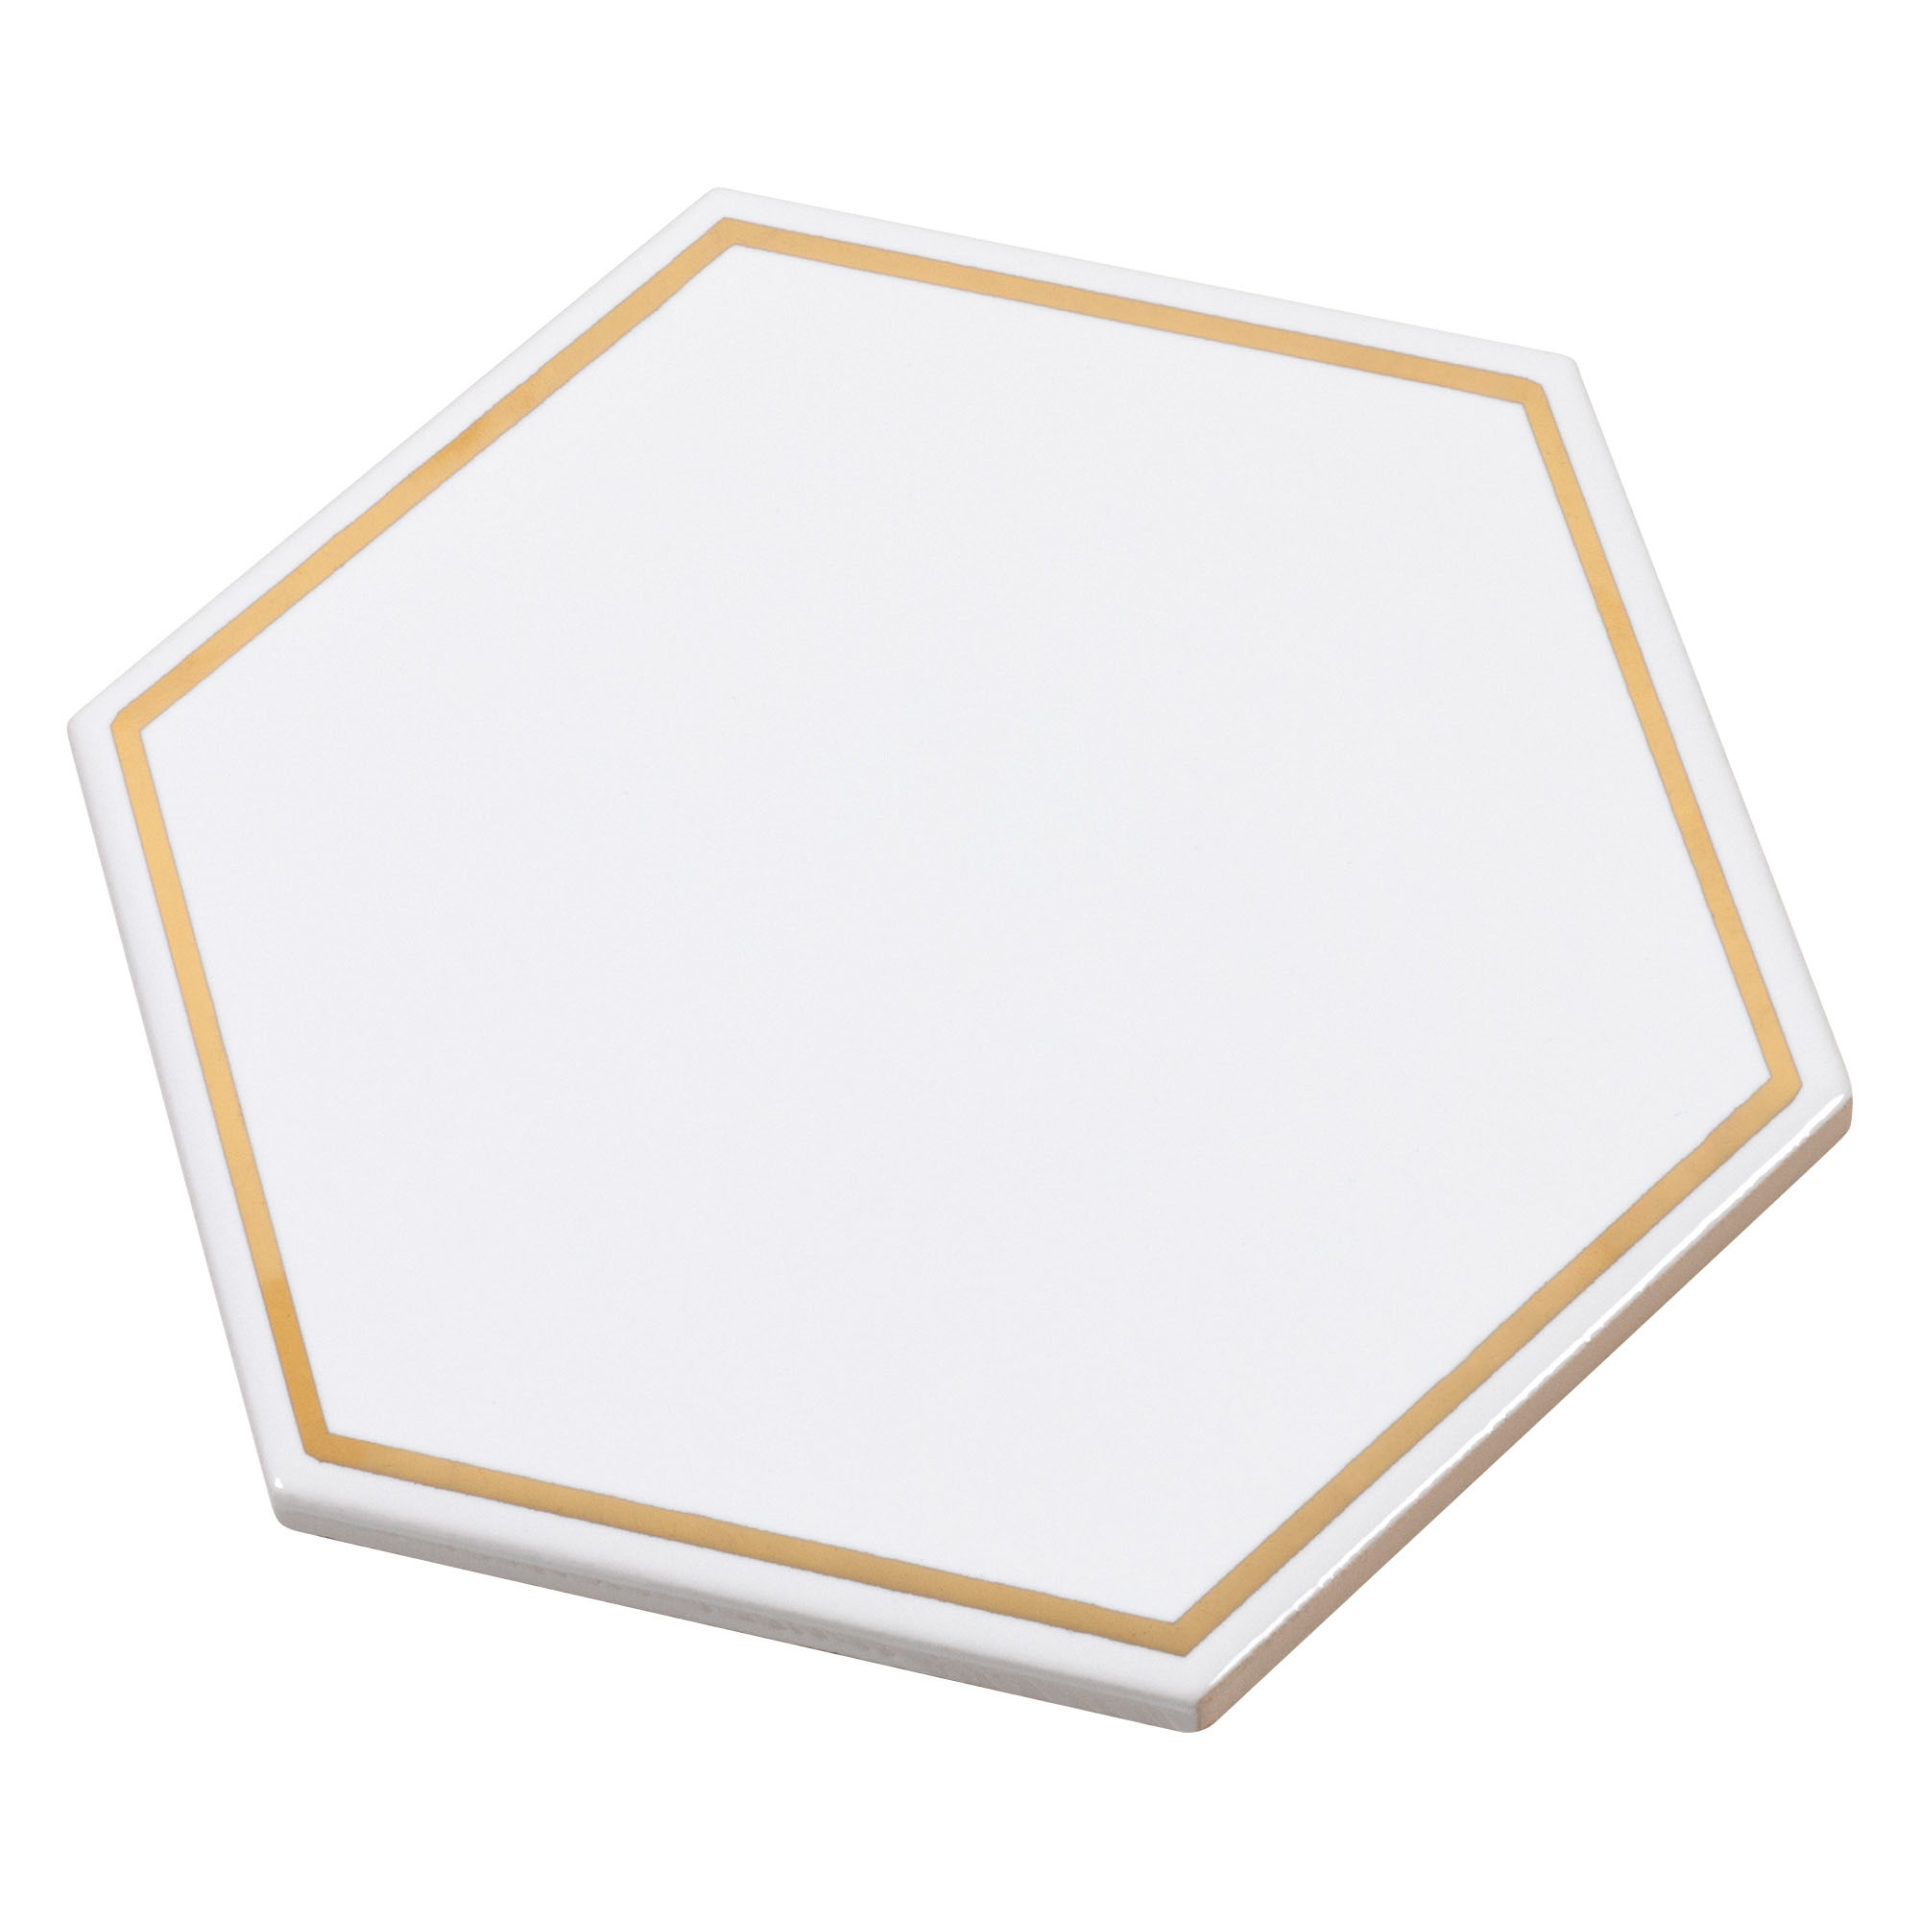 PC/タブレット PC周辺機器 Shop Now On The Edge - 14k Hex Tile | Anthology Tile | Creative Tile